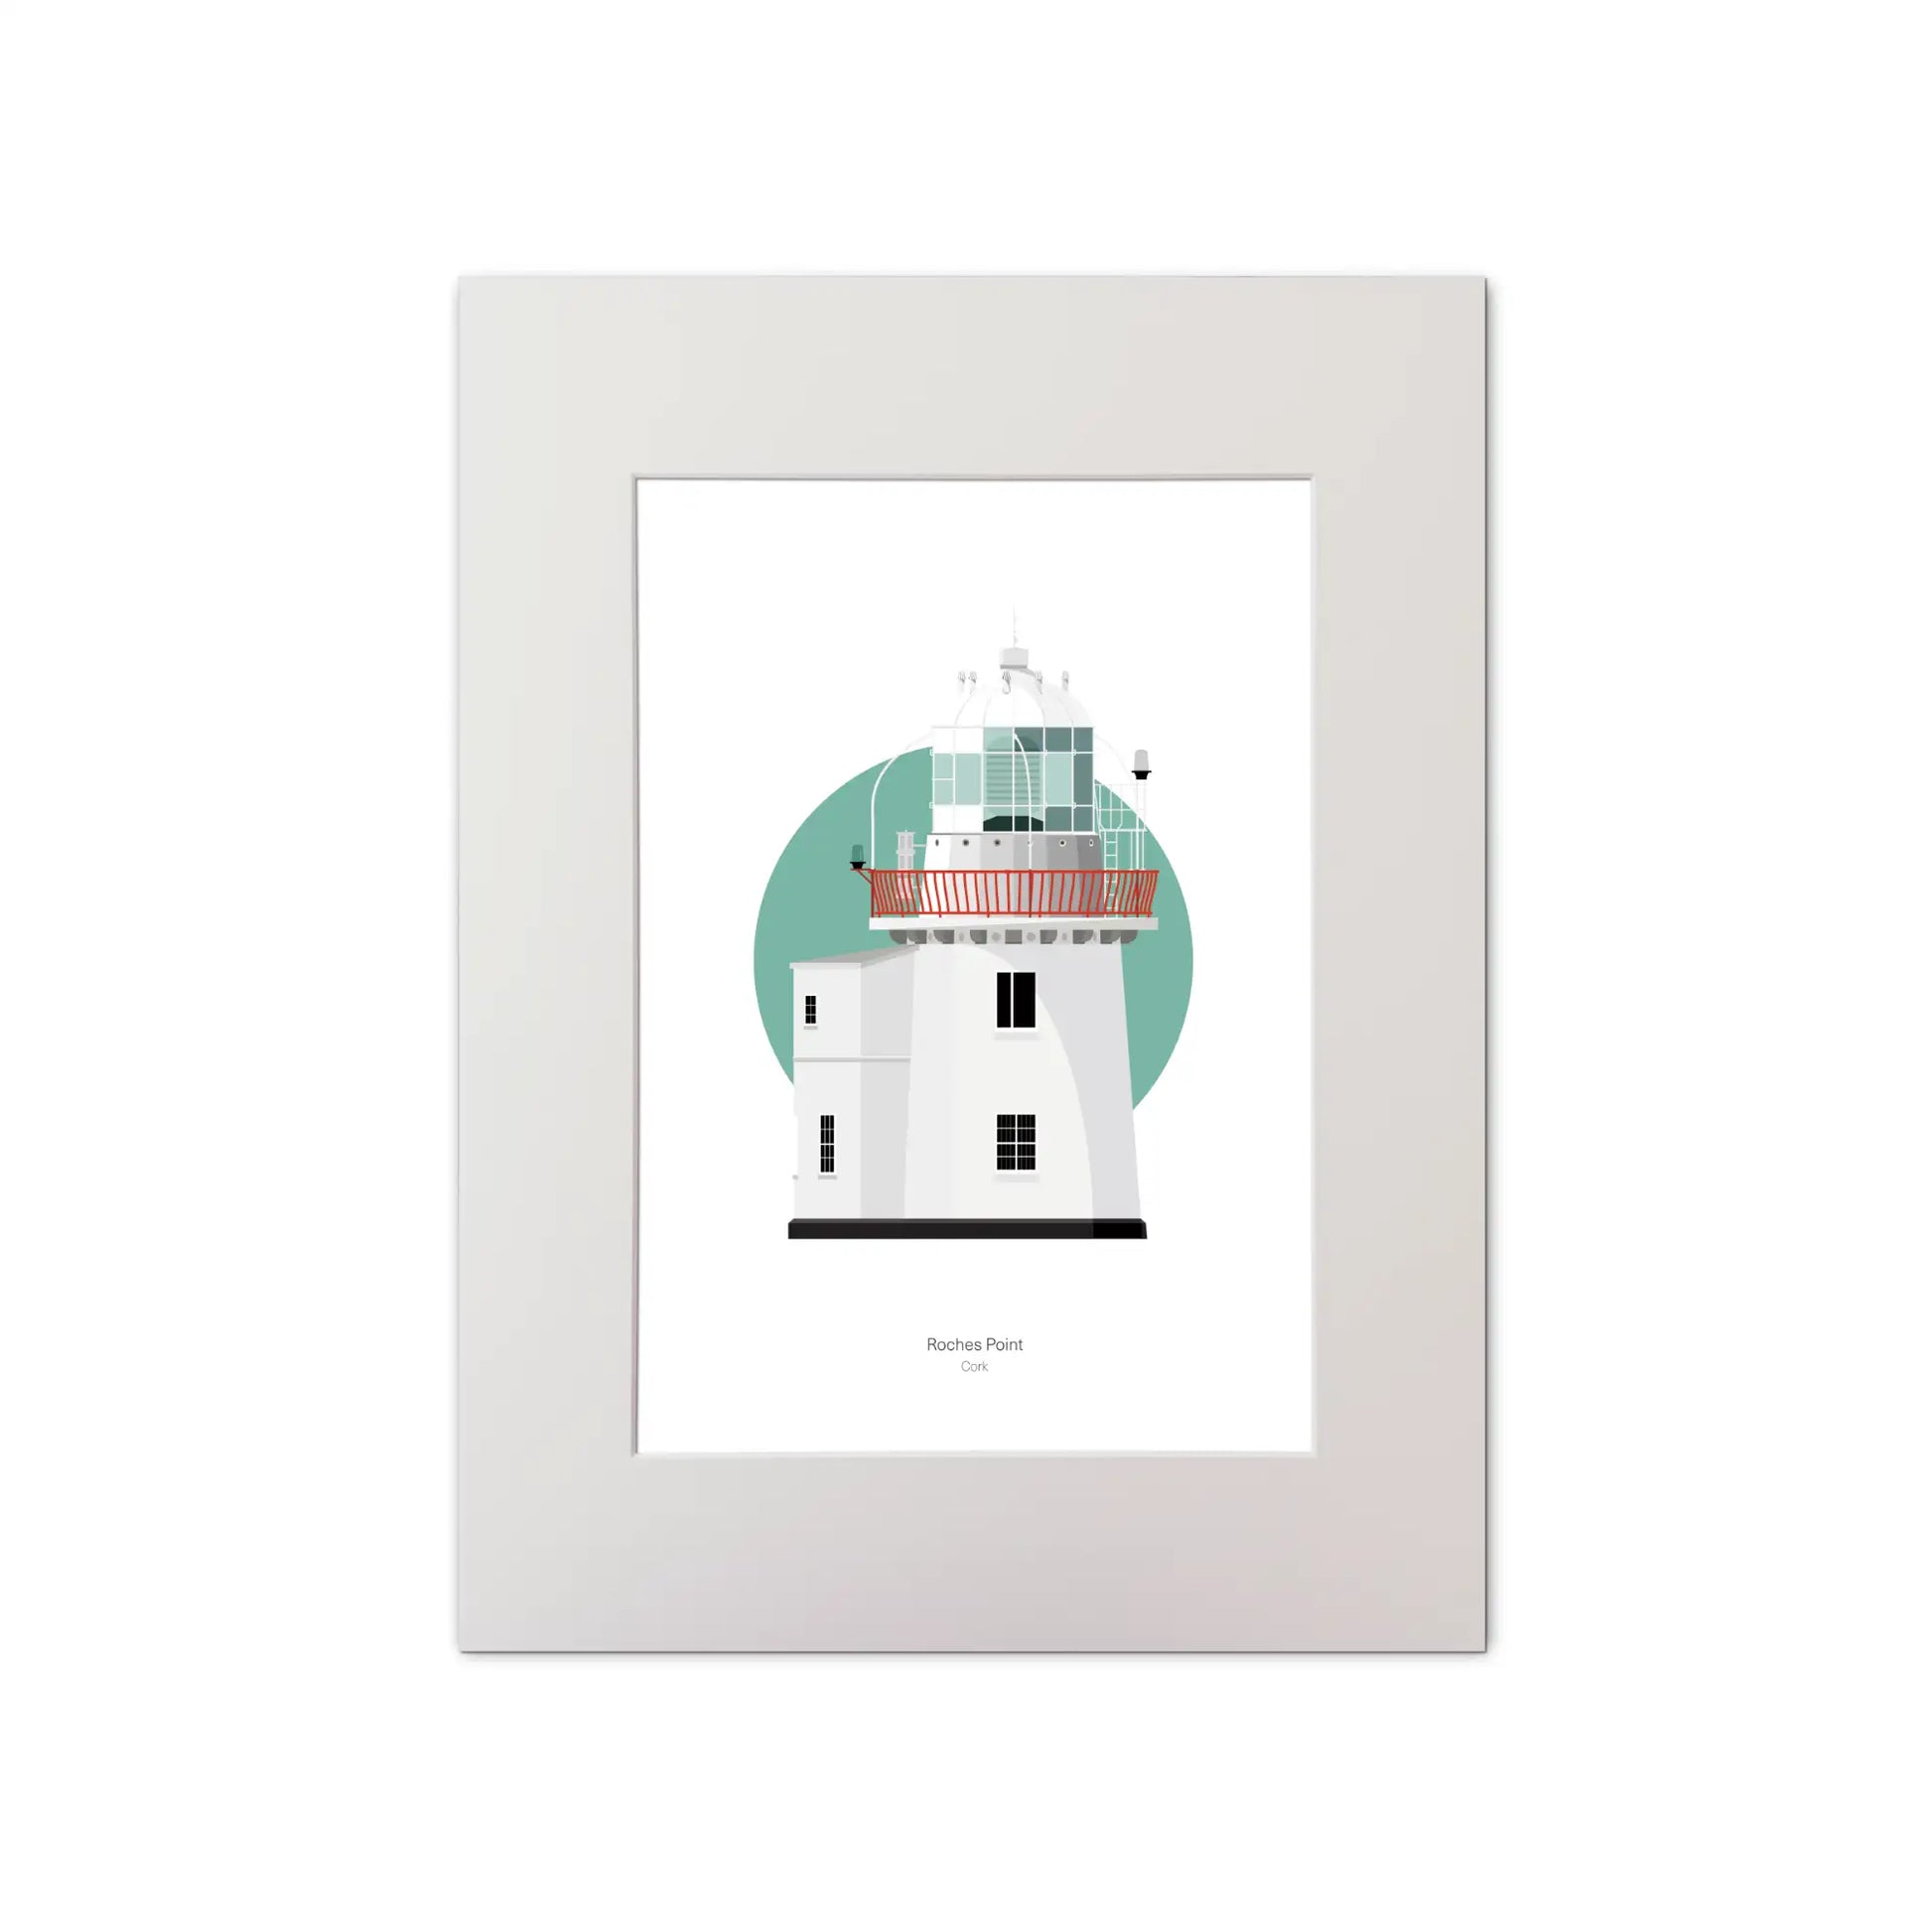 Illustration of Roches Point lighthouse on a white background inside light blue square, mounted and measuring 30x40cm.